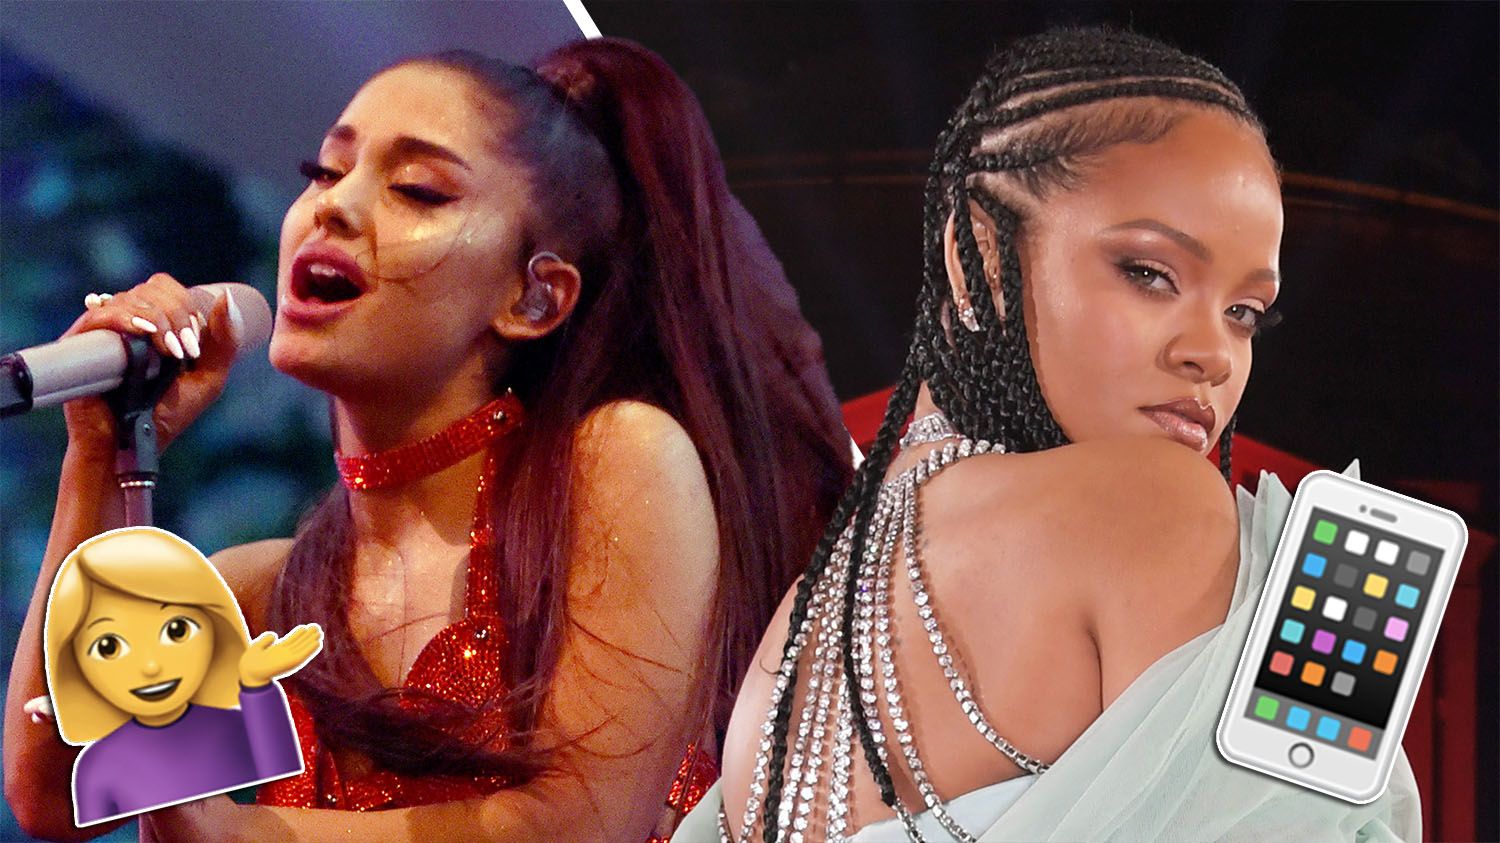 Ariana Grande and Rihanna in the top 10 most tweeted-about artists of 2019